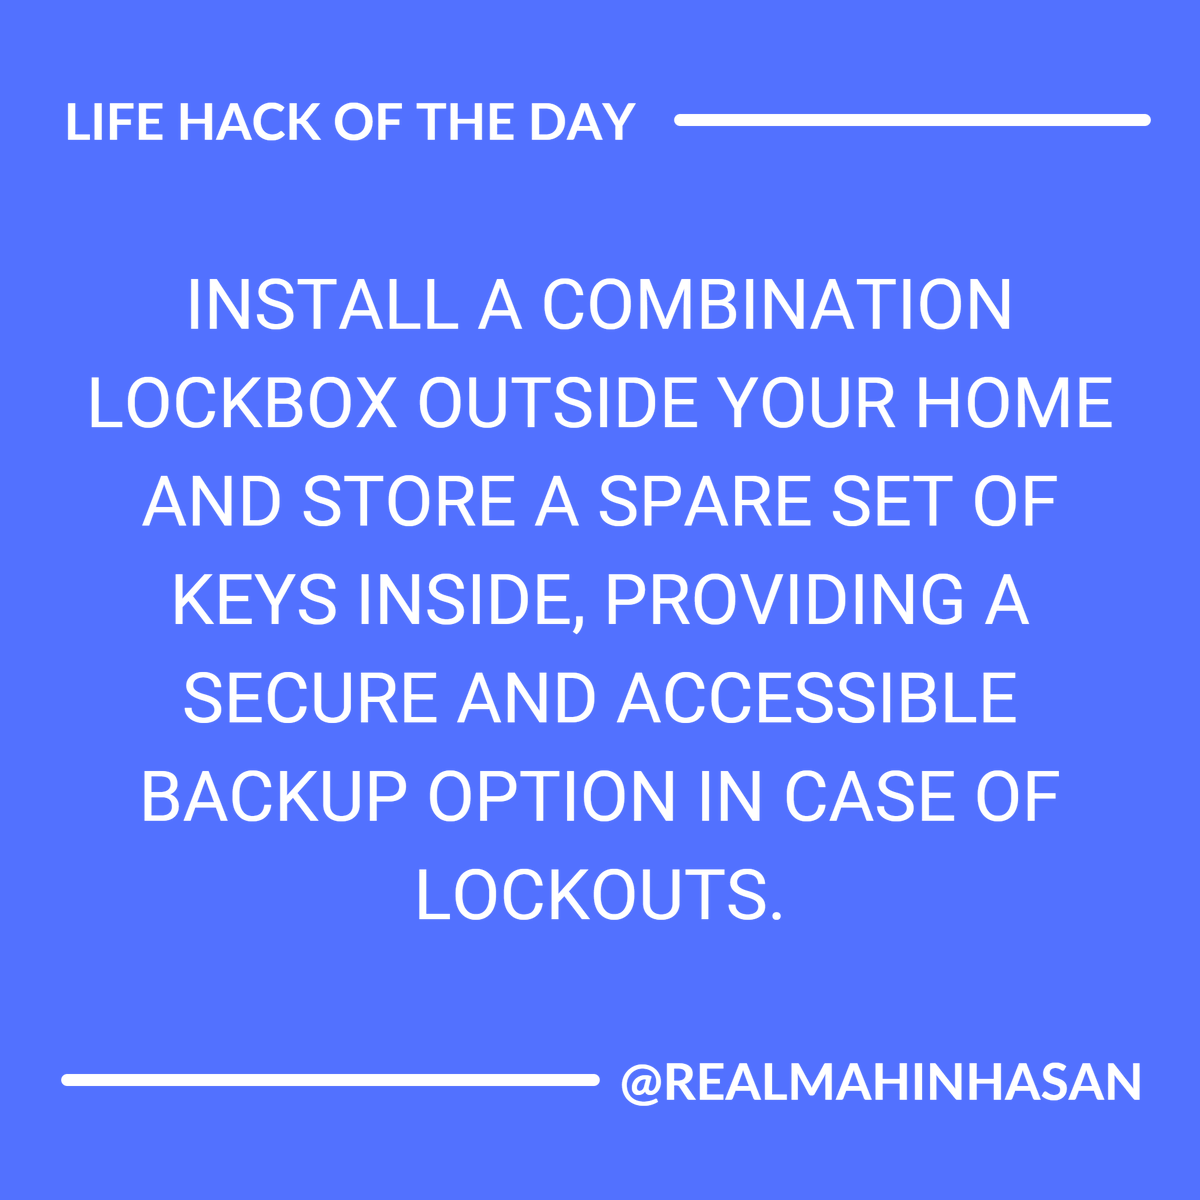 Keep a spare set of keys in a combination lockbox outside your home for emergencies. #SafetyHack #KeyStorage